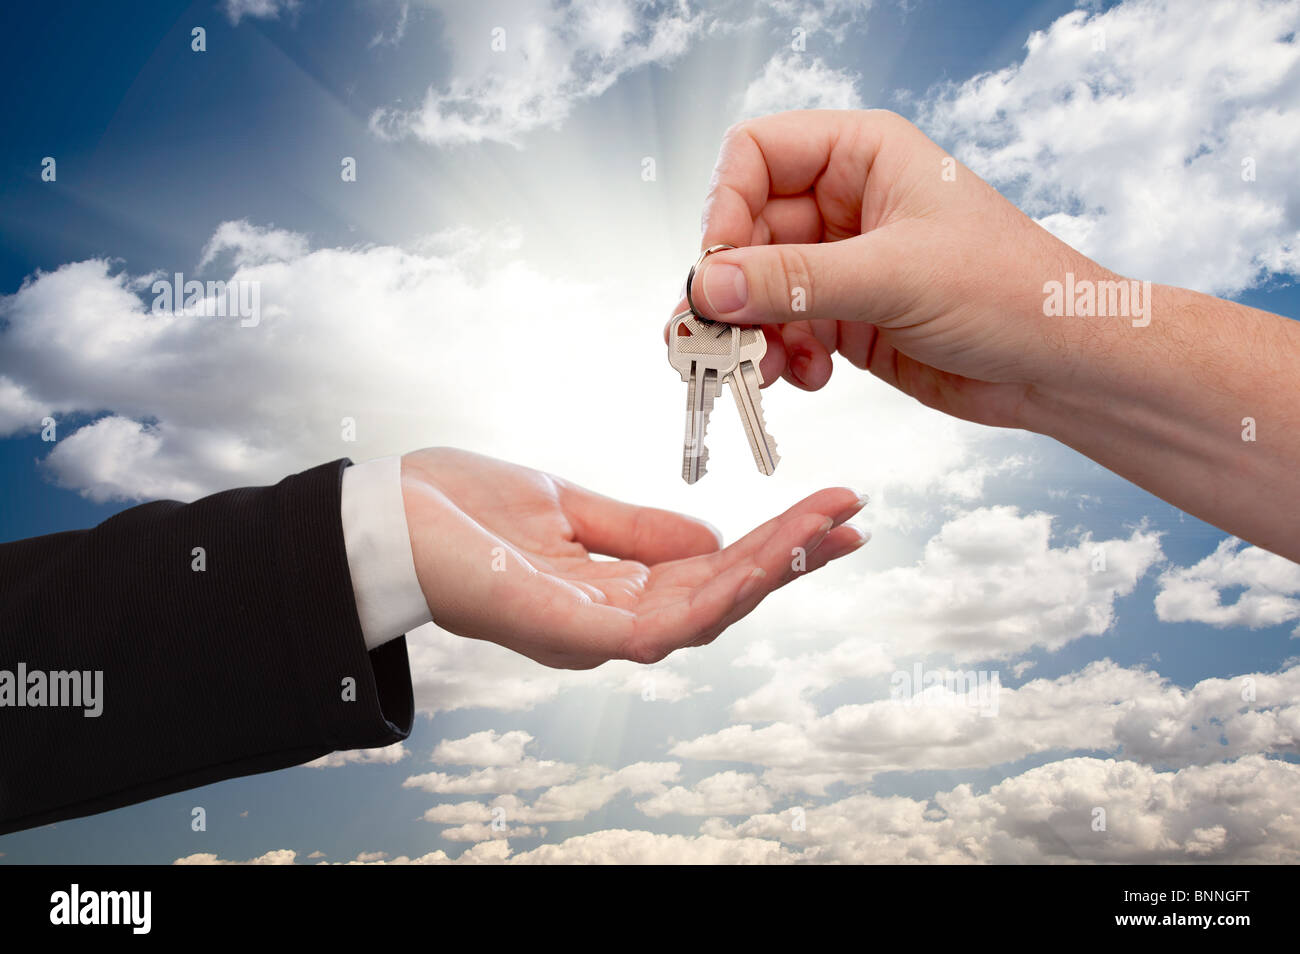 Male Hand Handing Over Keys to Female Hand Over Dramatic Clouds and Sun Rays. Stock Photo